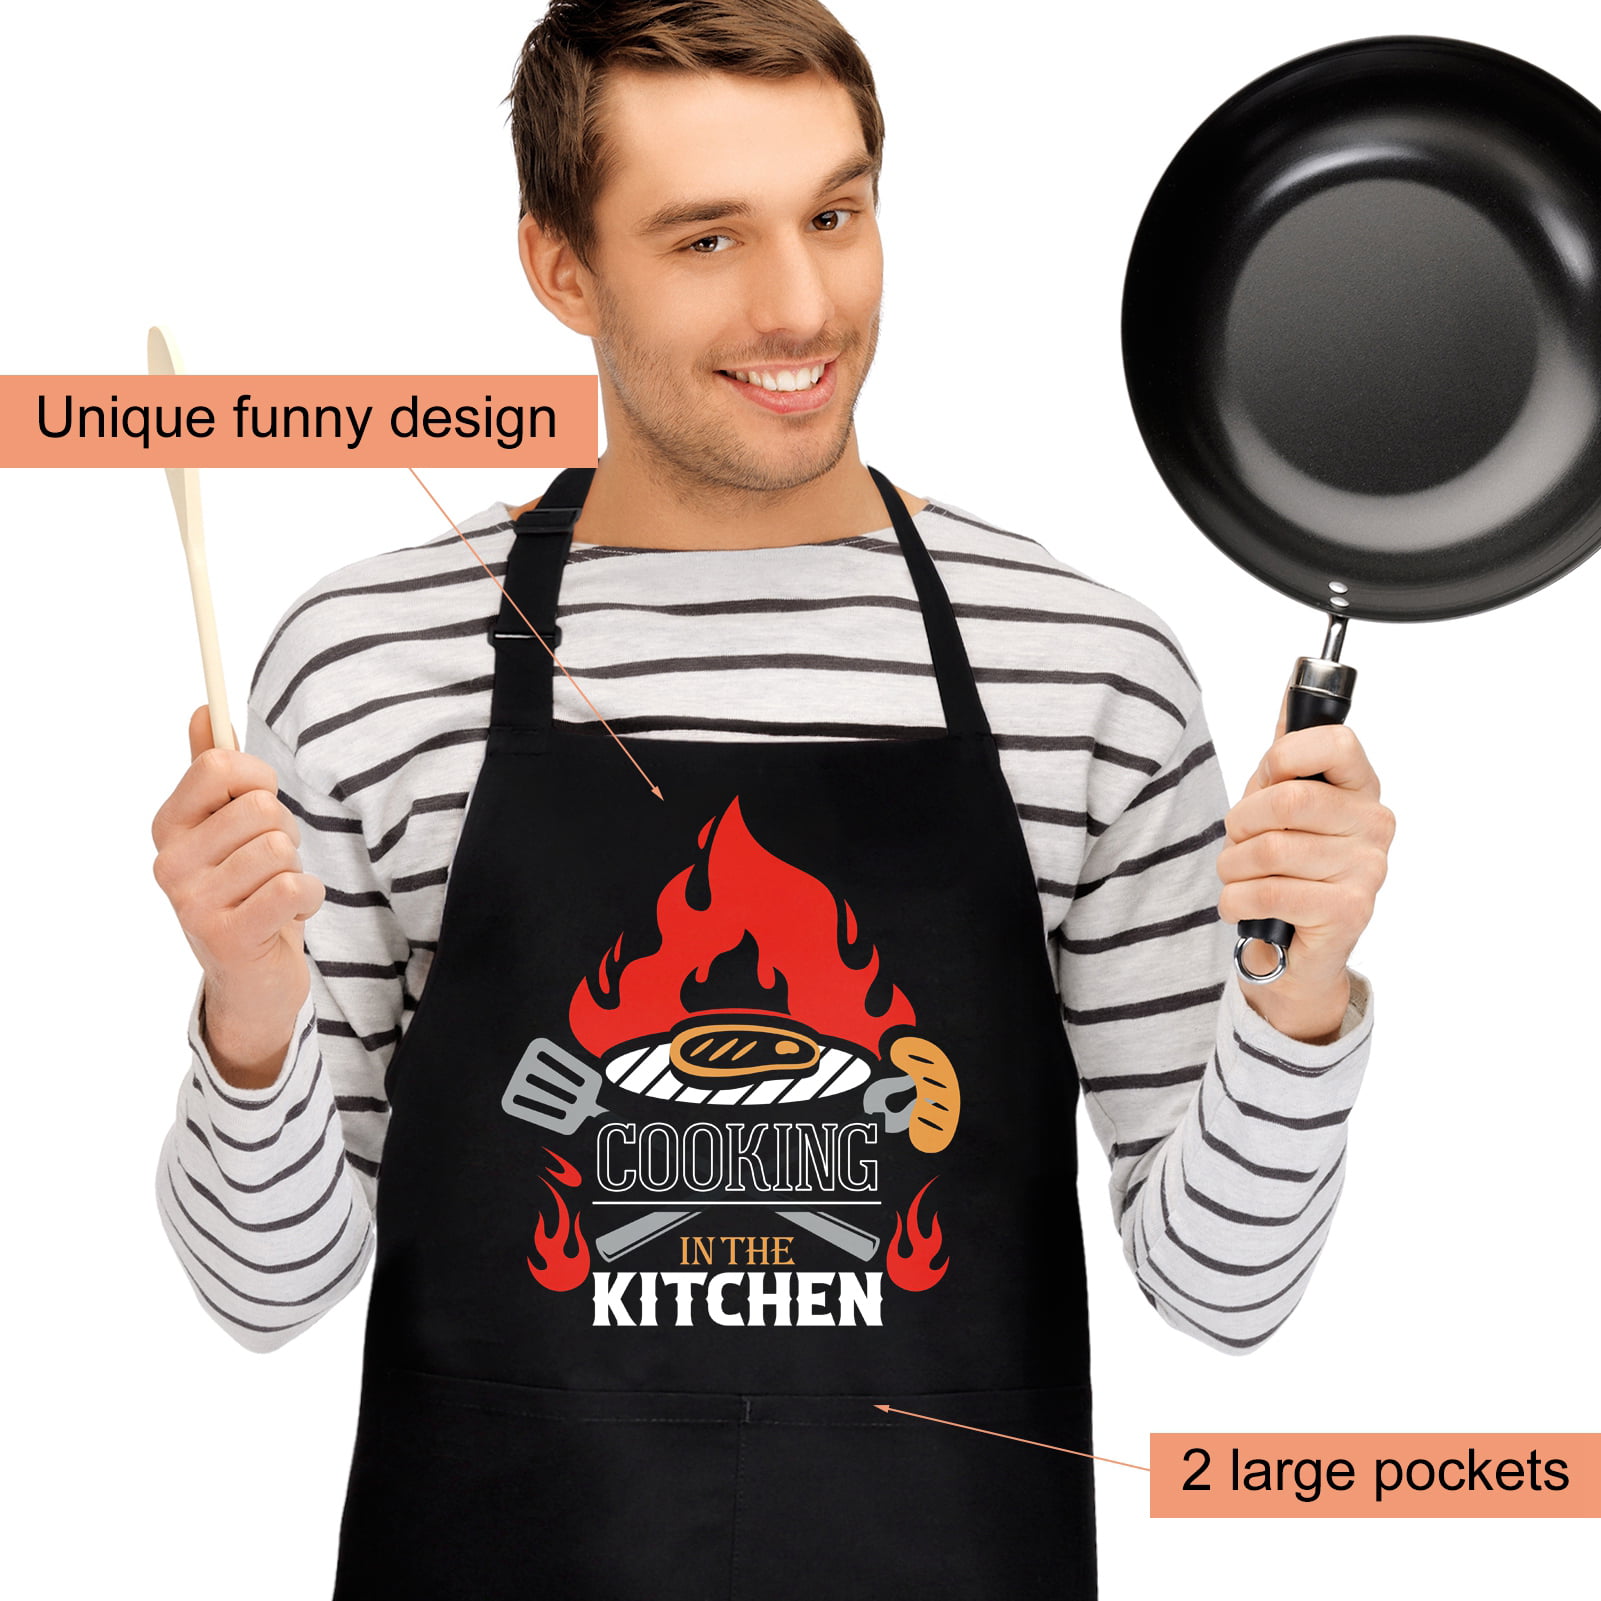 Infankey Funny Apron Cooking Gifts for Men, Apron with 2 Pockets Adjustable  Neck Strap,Waterproof,Gifts for Dad,Husband Gifts